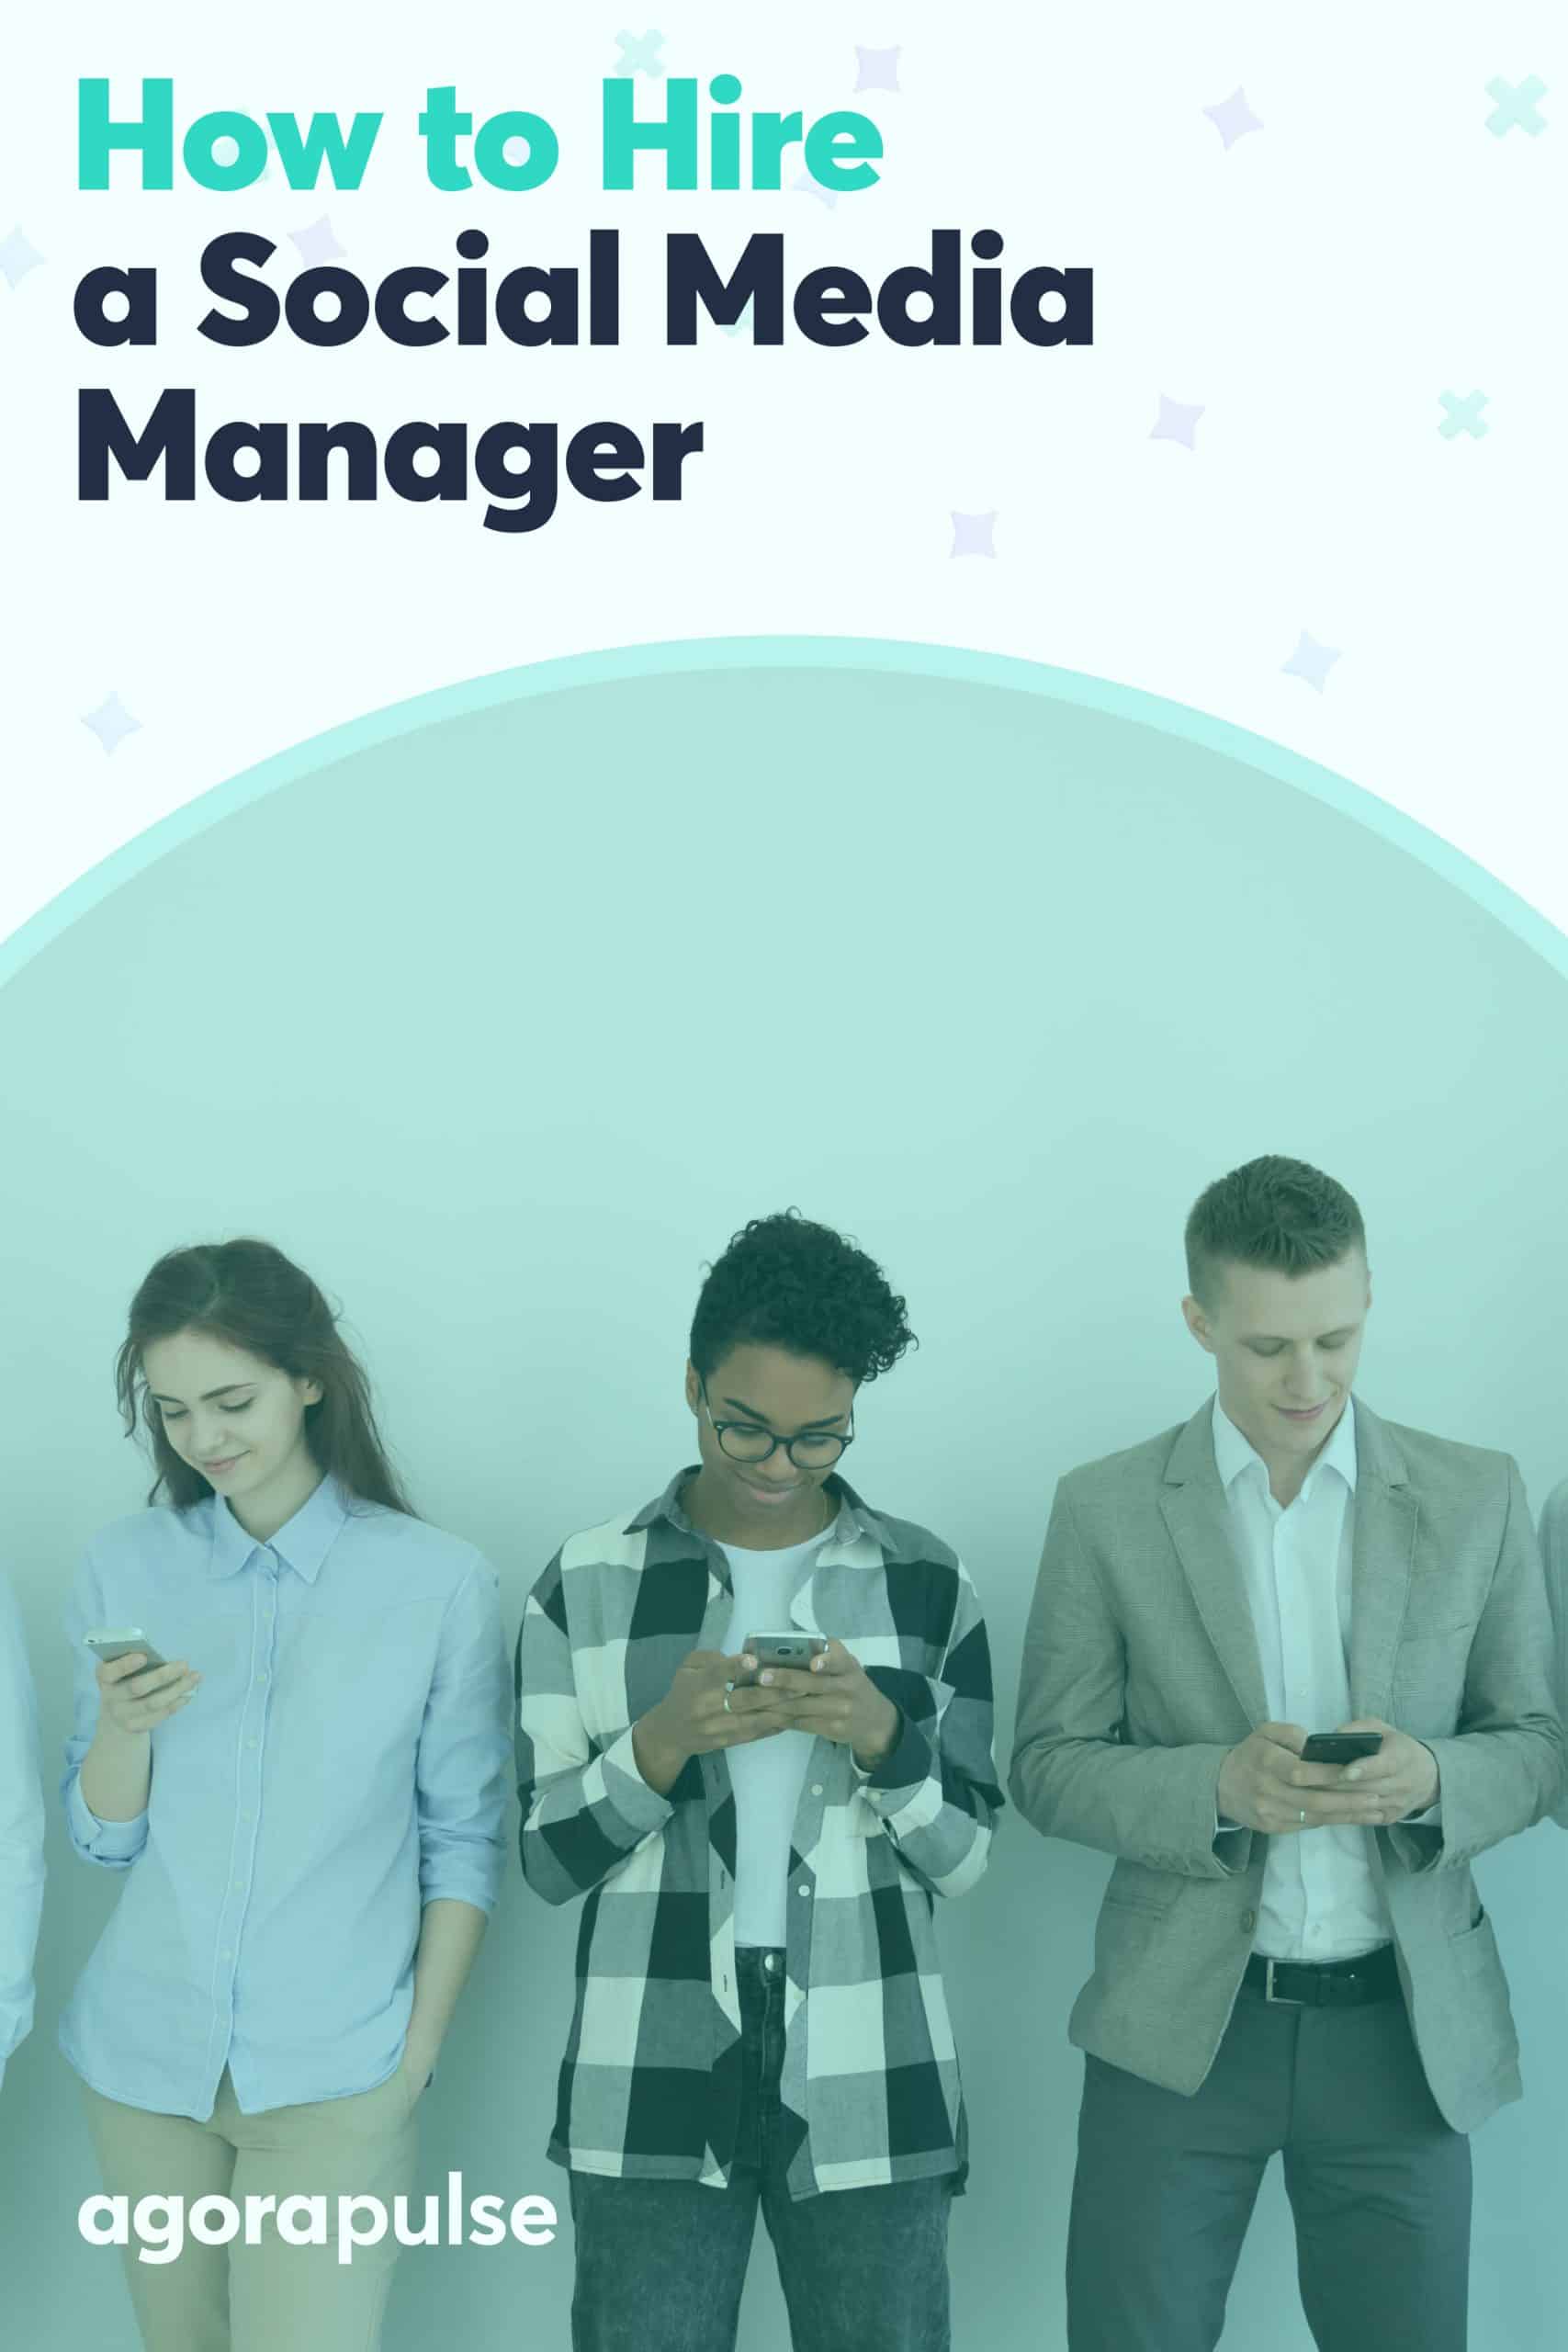 How Hire a Social Media Manager That Best Fits Your Company